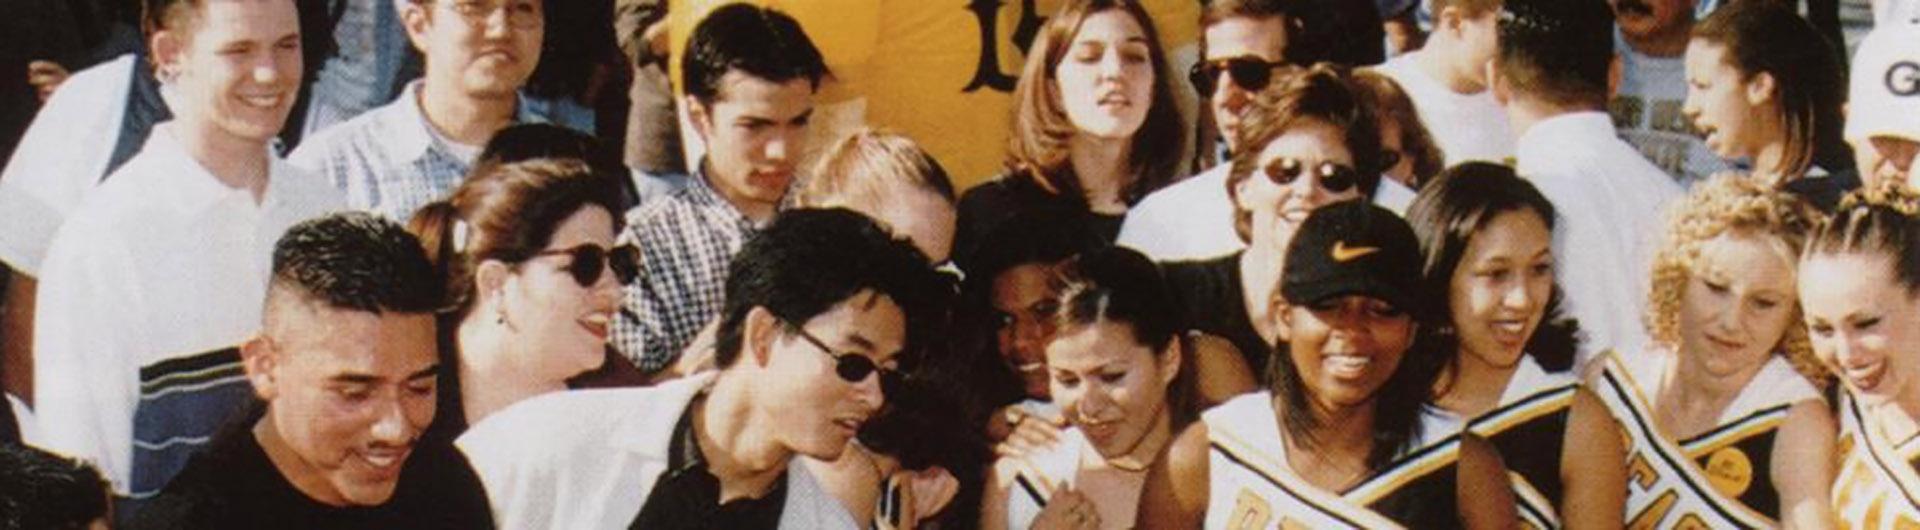 1990's campus photo, students at a university event